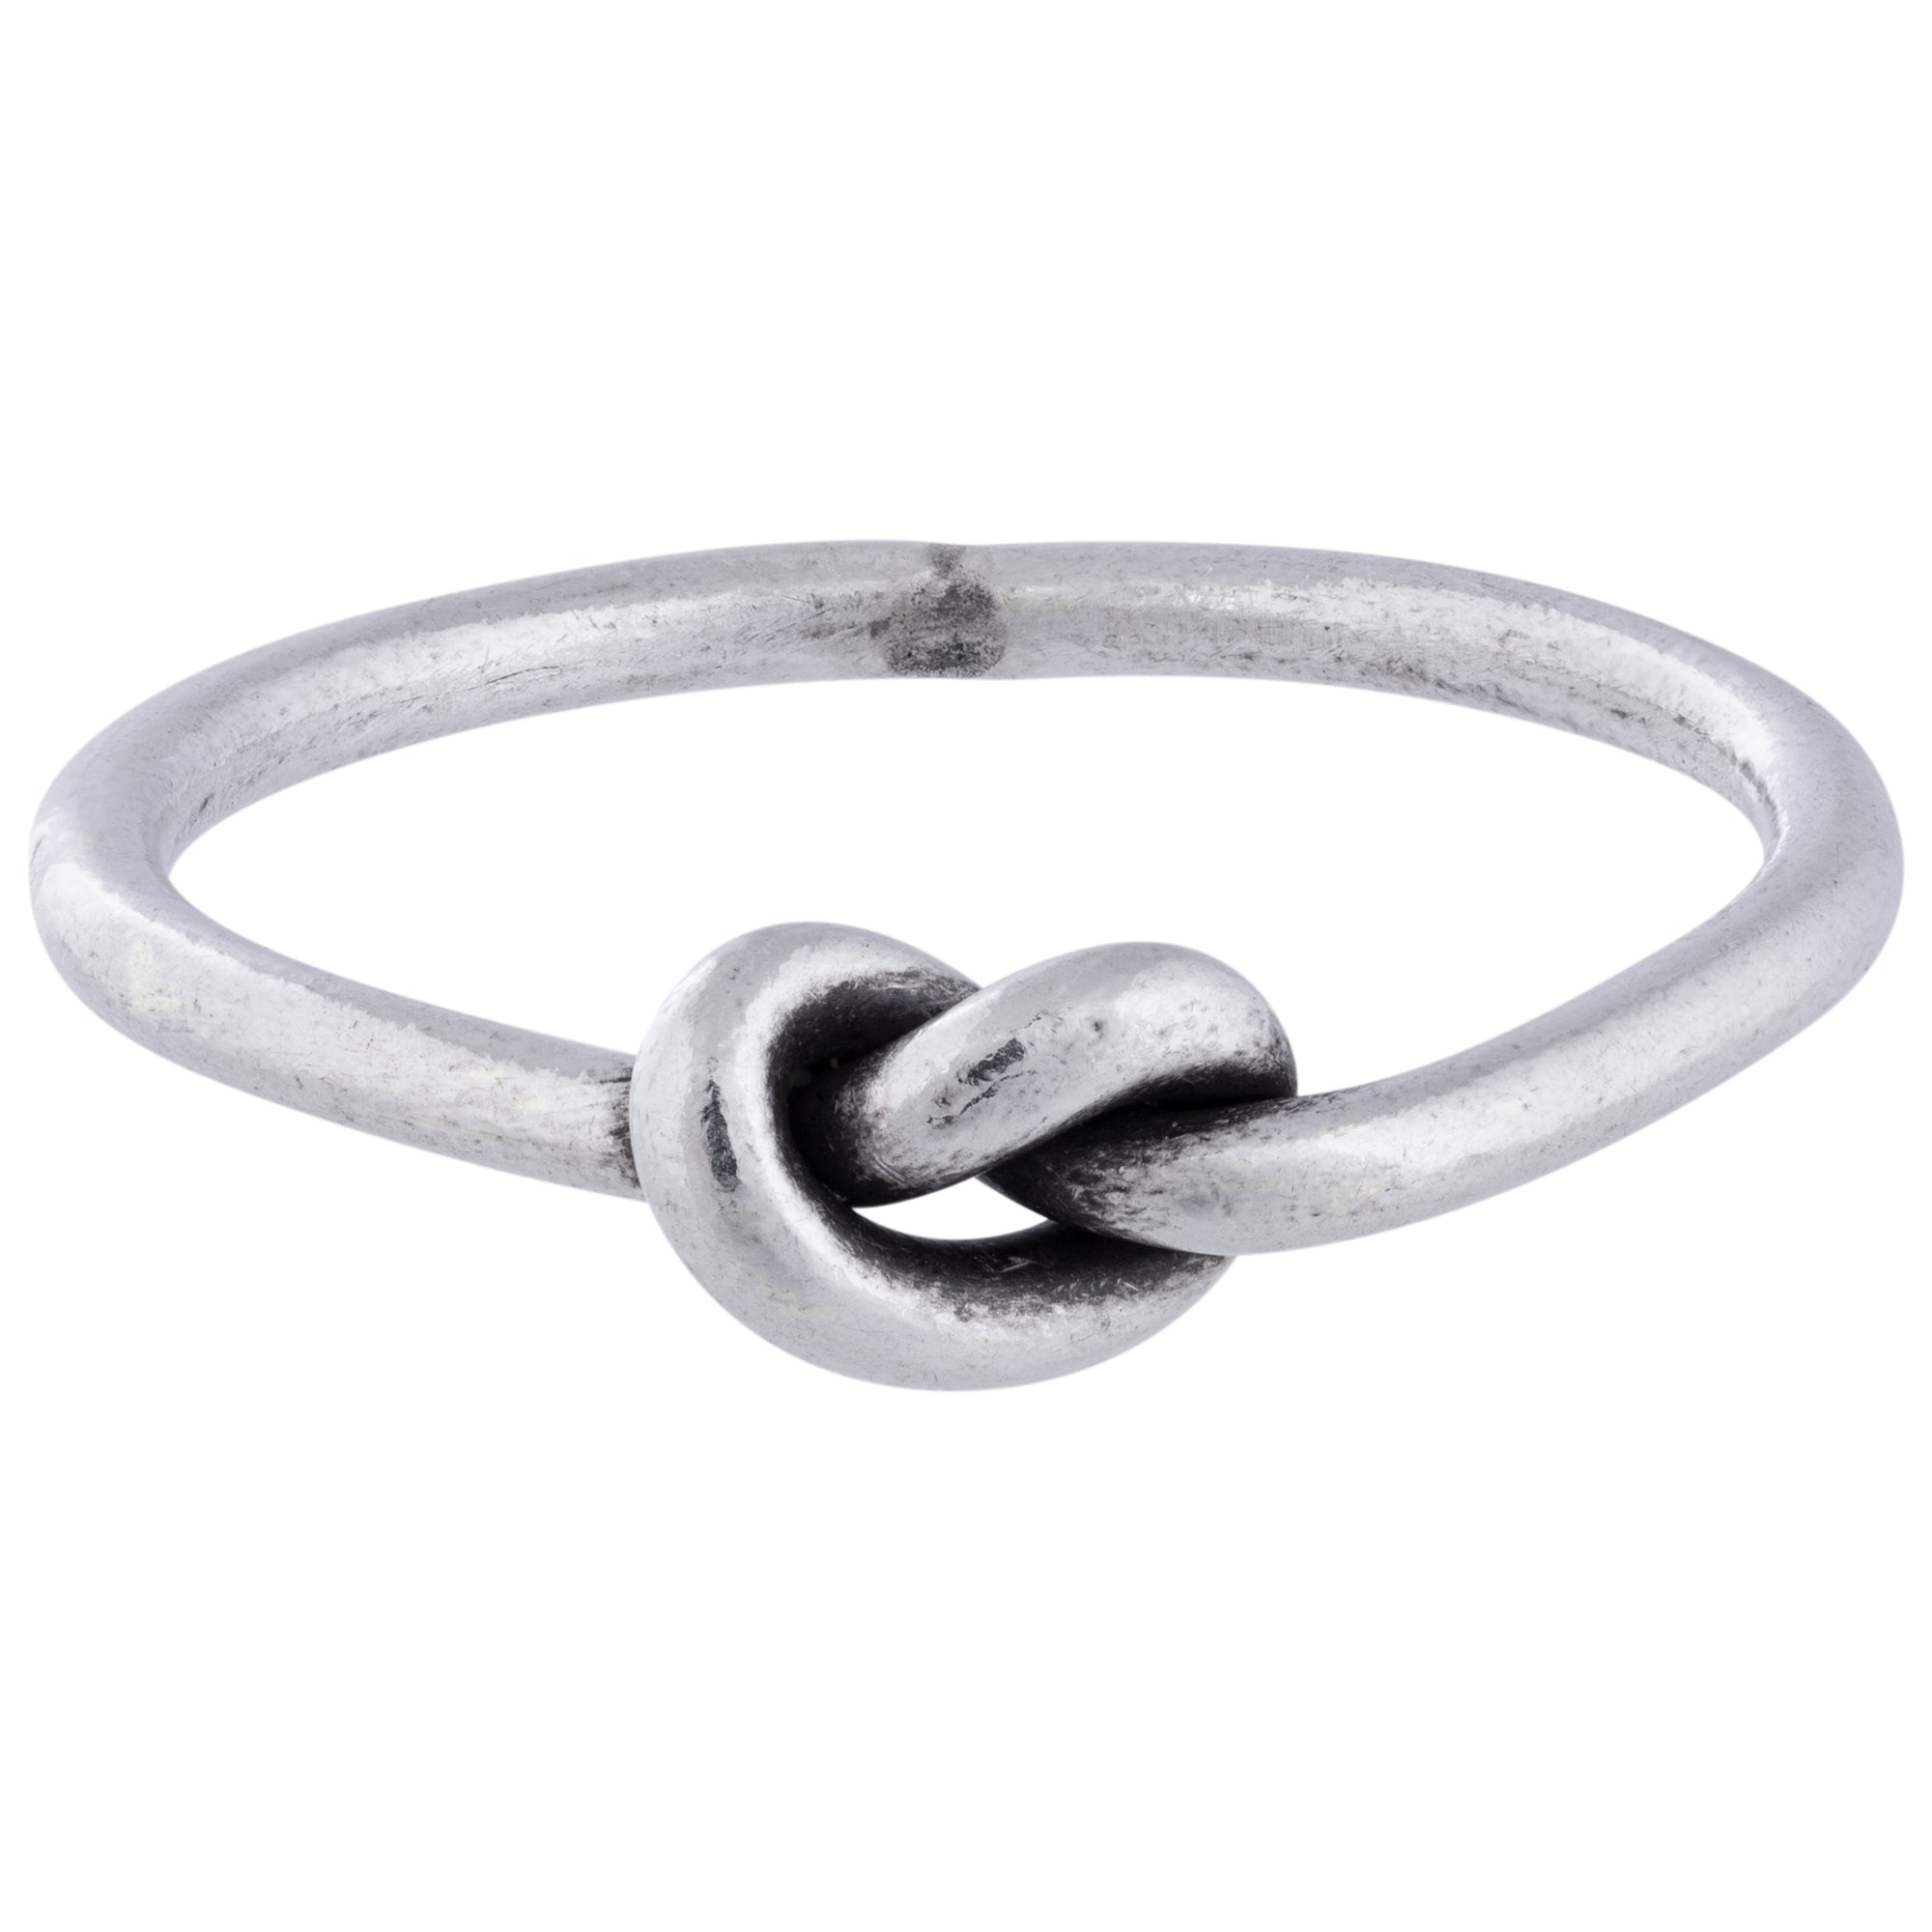 Tiny Knot Sterling Silver Ring - Size 8